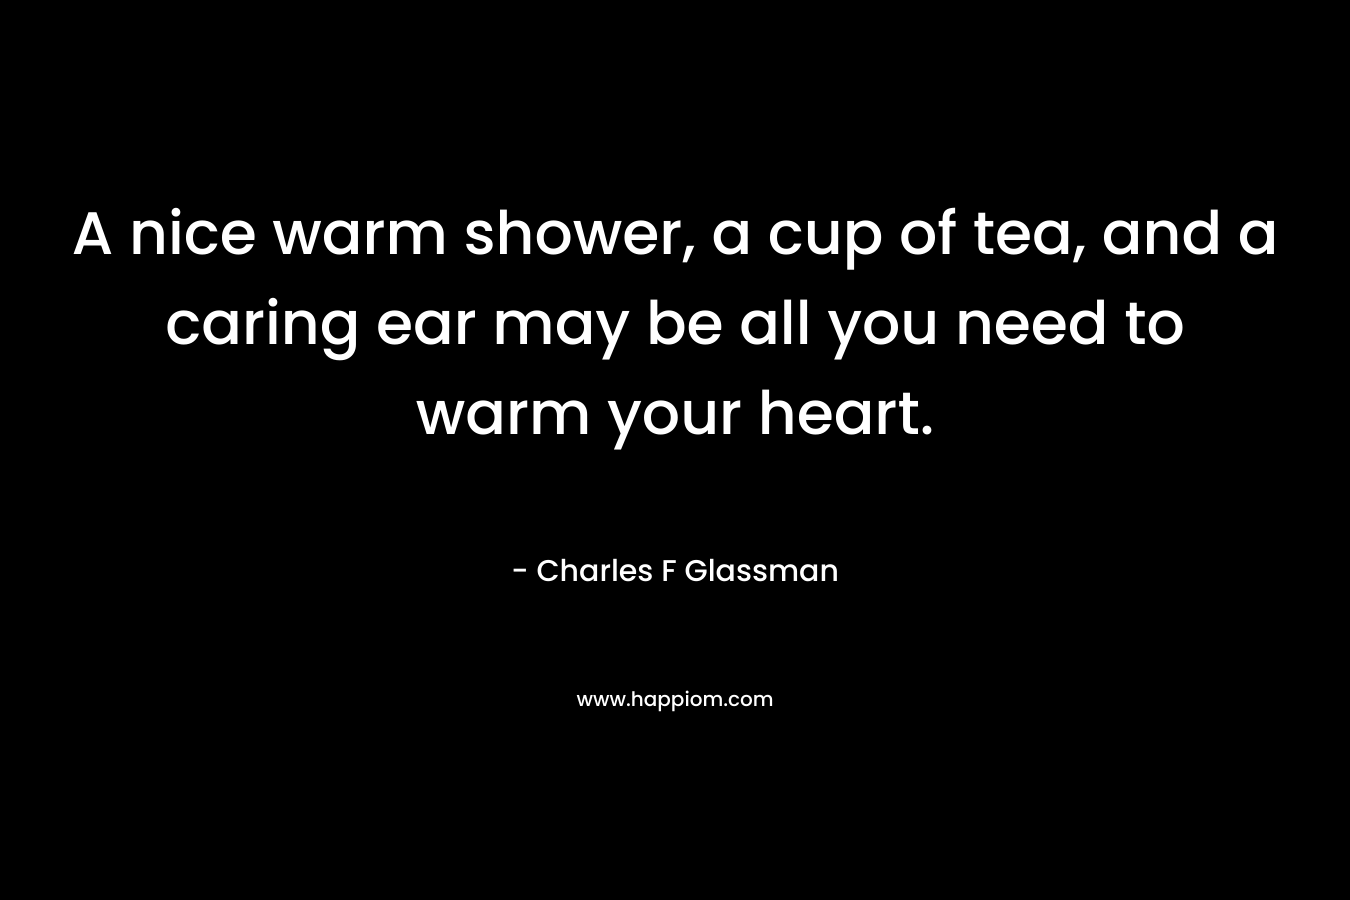 A nice warm shower, a cup of tea, and a caring ear may be all you need to warm your heart. – Charles F Glassman